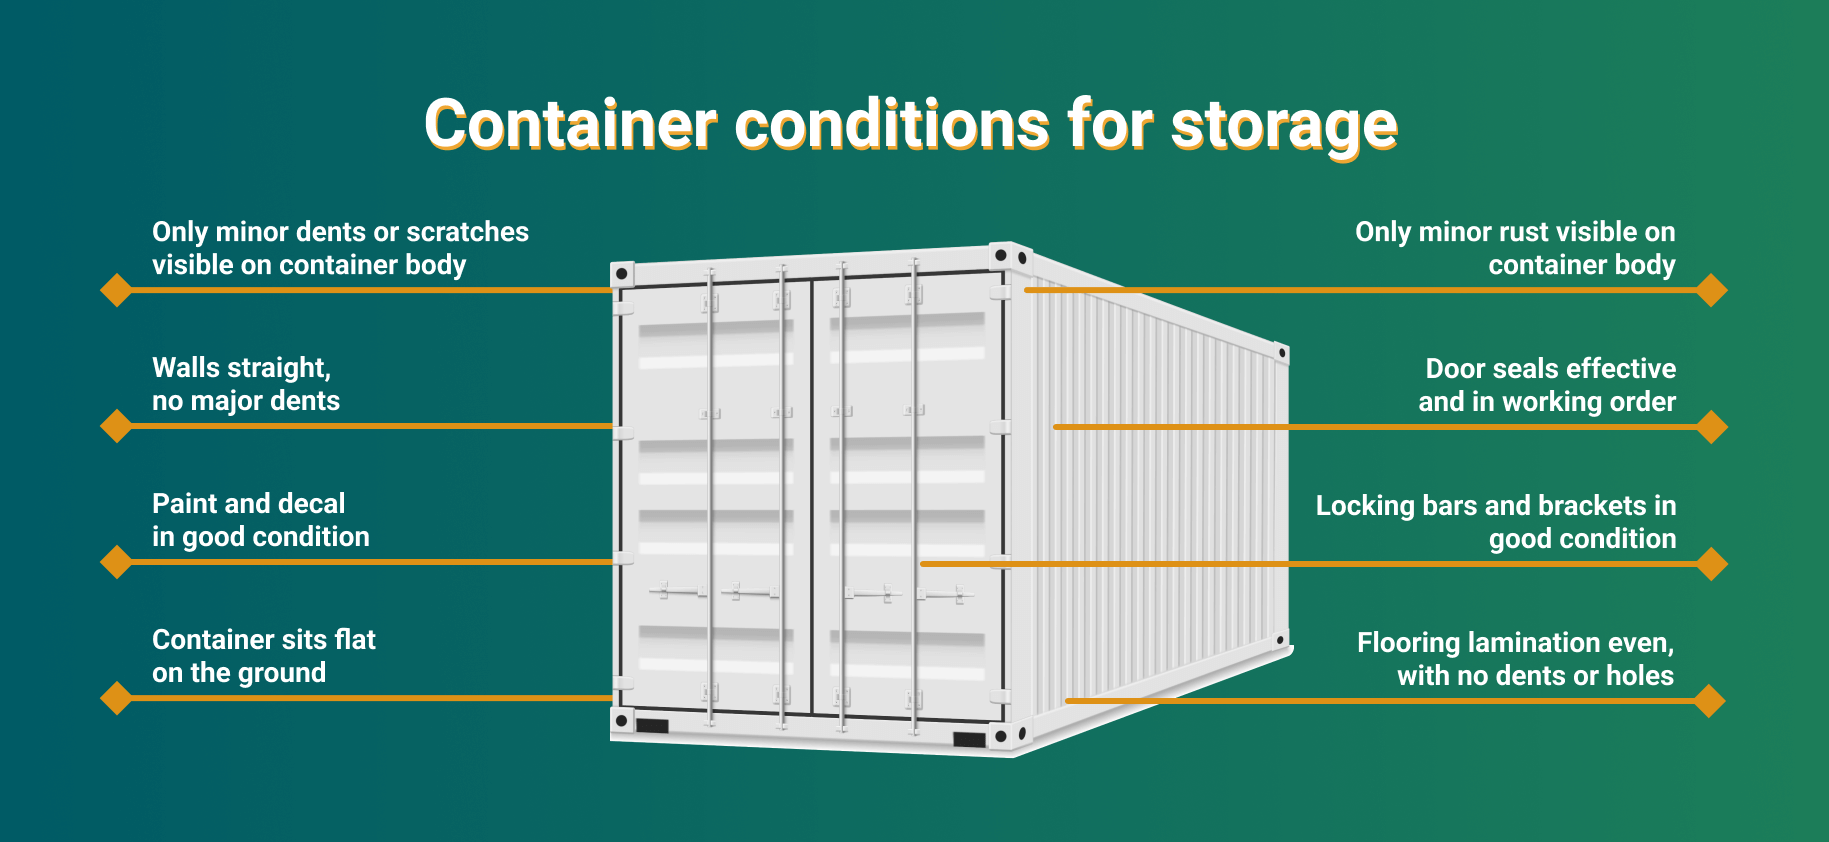 Storage container conditions